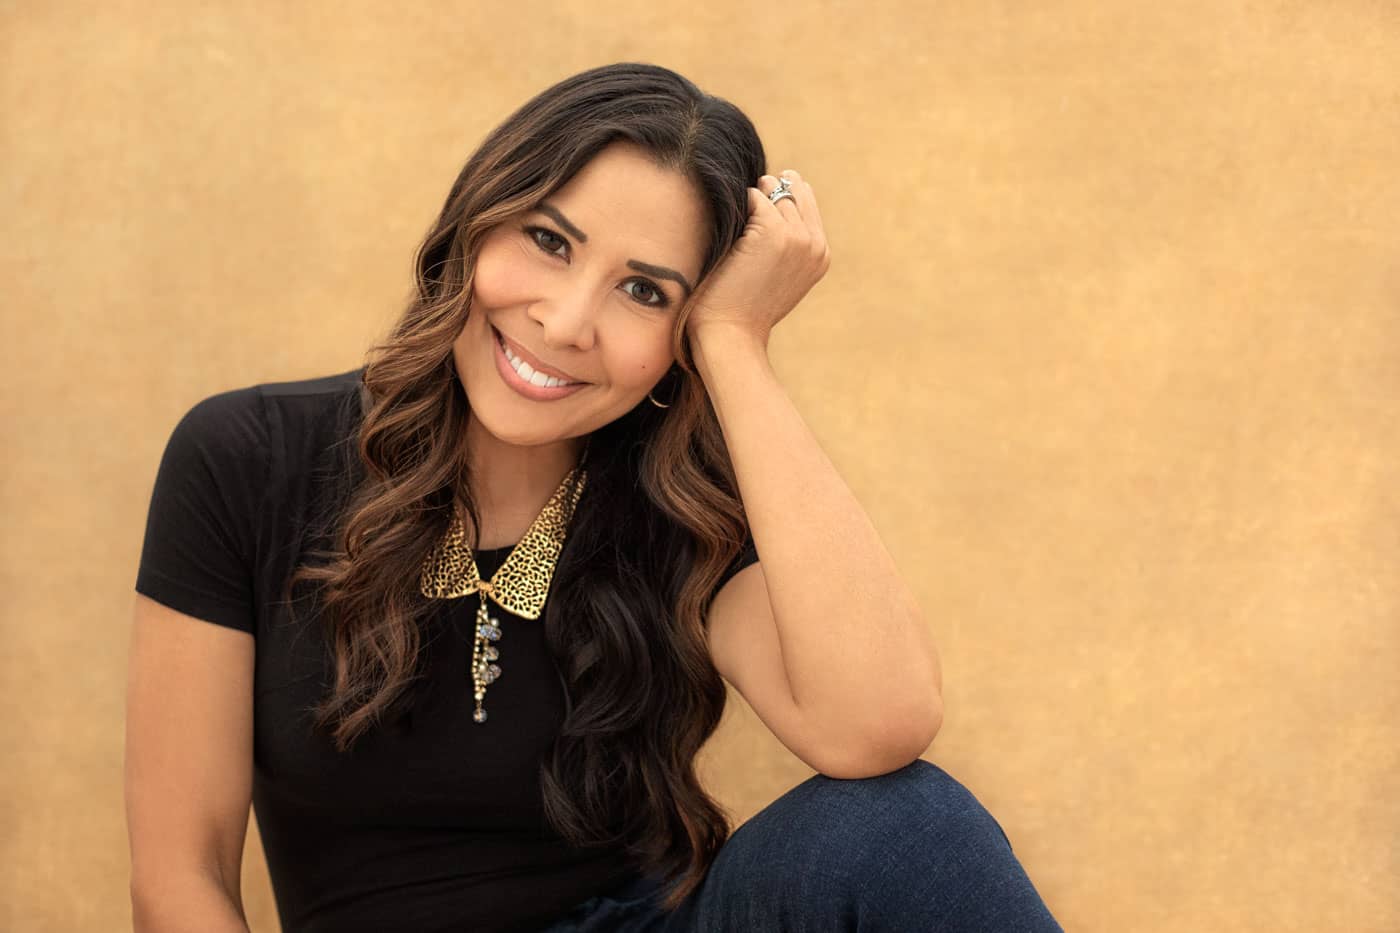 Bright branding photo of a pretty, smiling woman sitting with her elbow resting on her knee and her head rested on her hand. She's wearing a black shirt, jeans and a gold necklace. Myra Ruiz Personal Branding Photography.